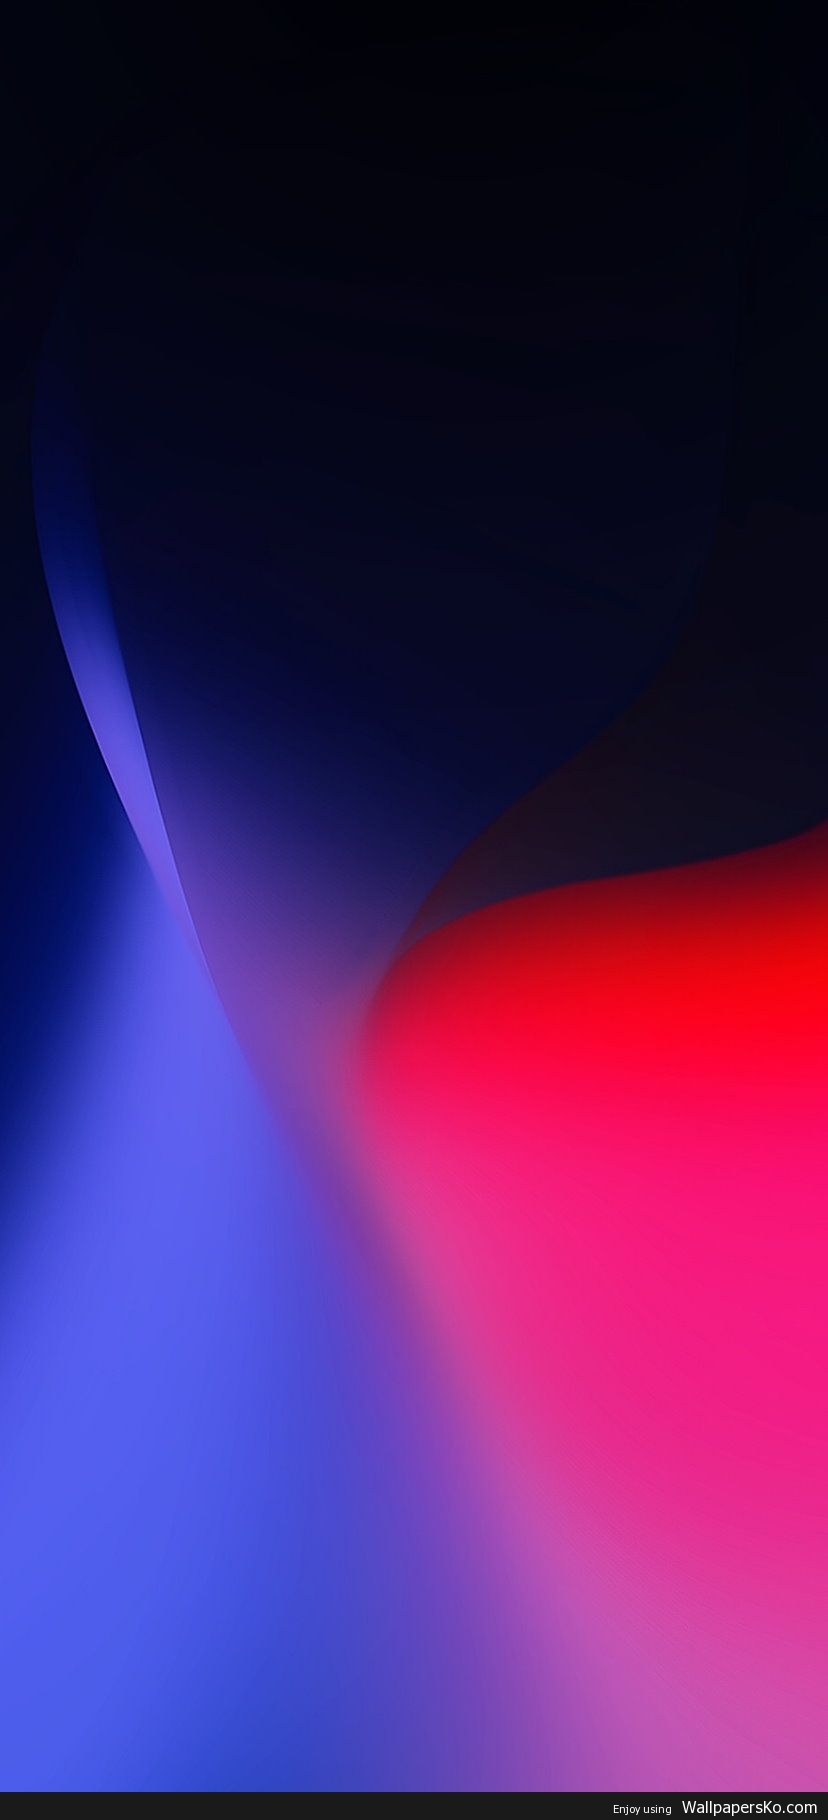 Wallpapers iPhone XR Free Download